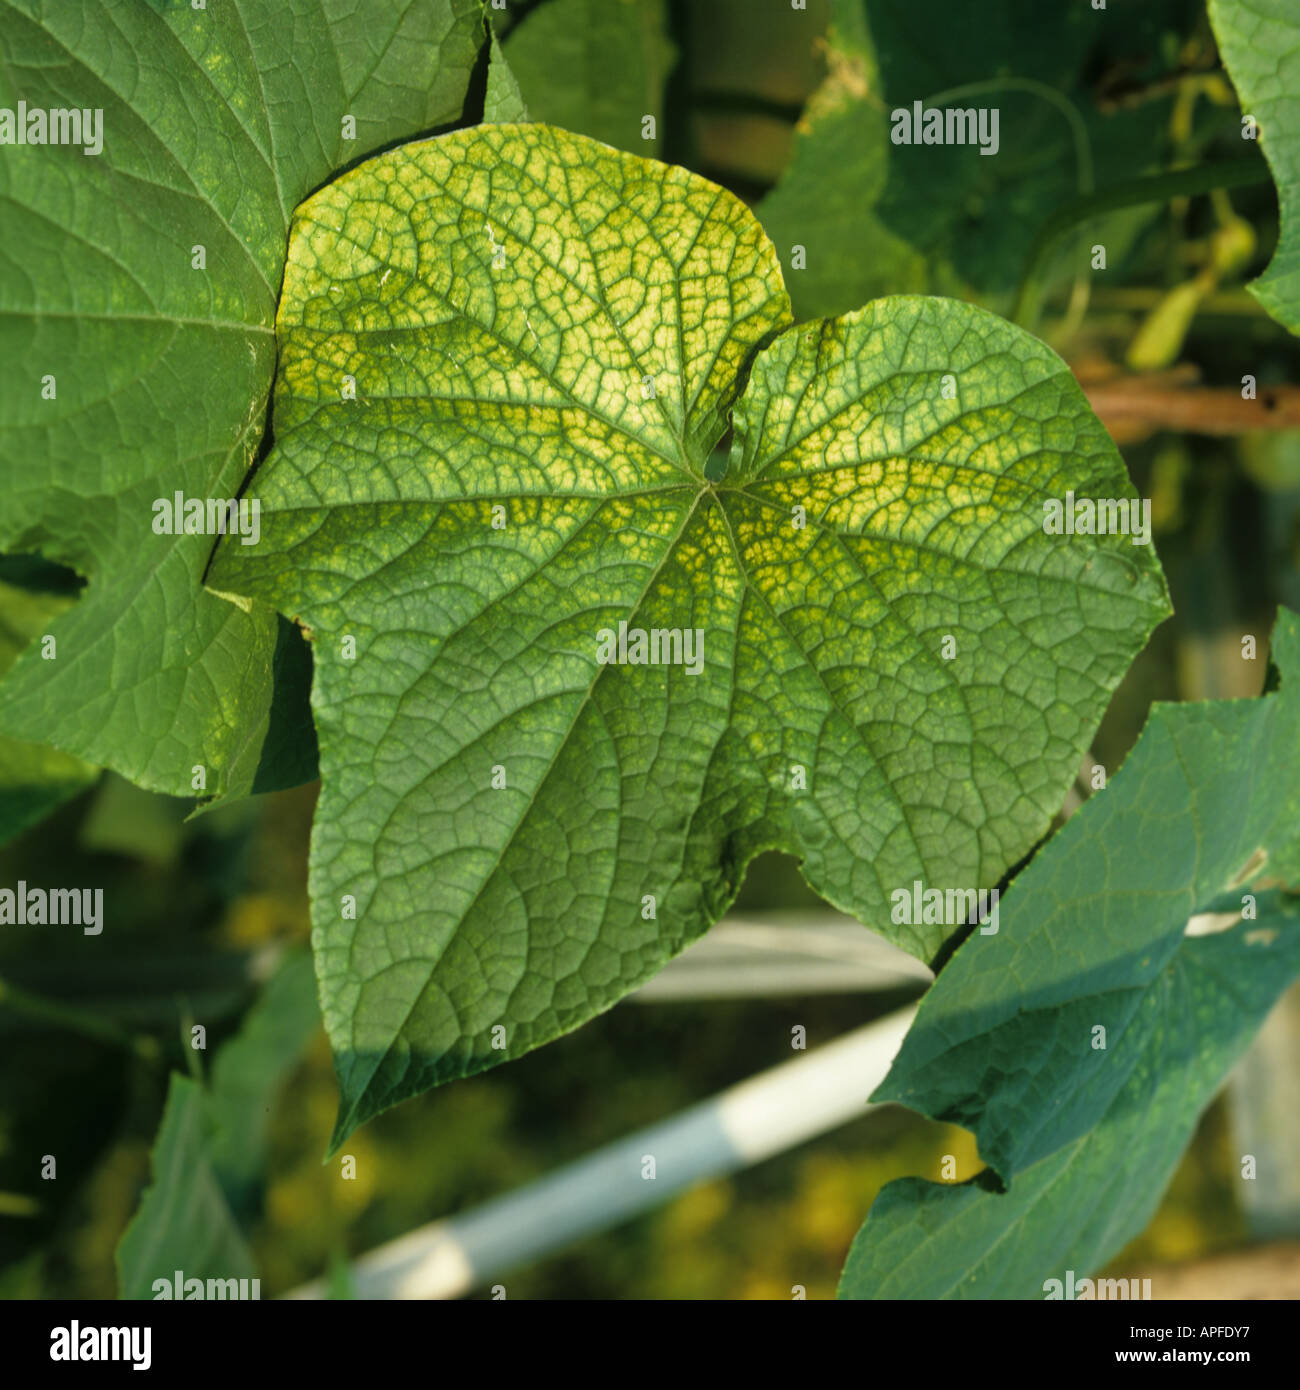 Leaf symptom of manganese deficiency Mn on a cucumber Stock Photo